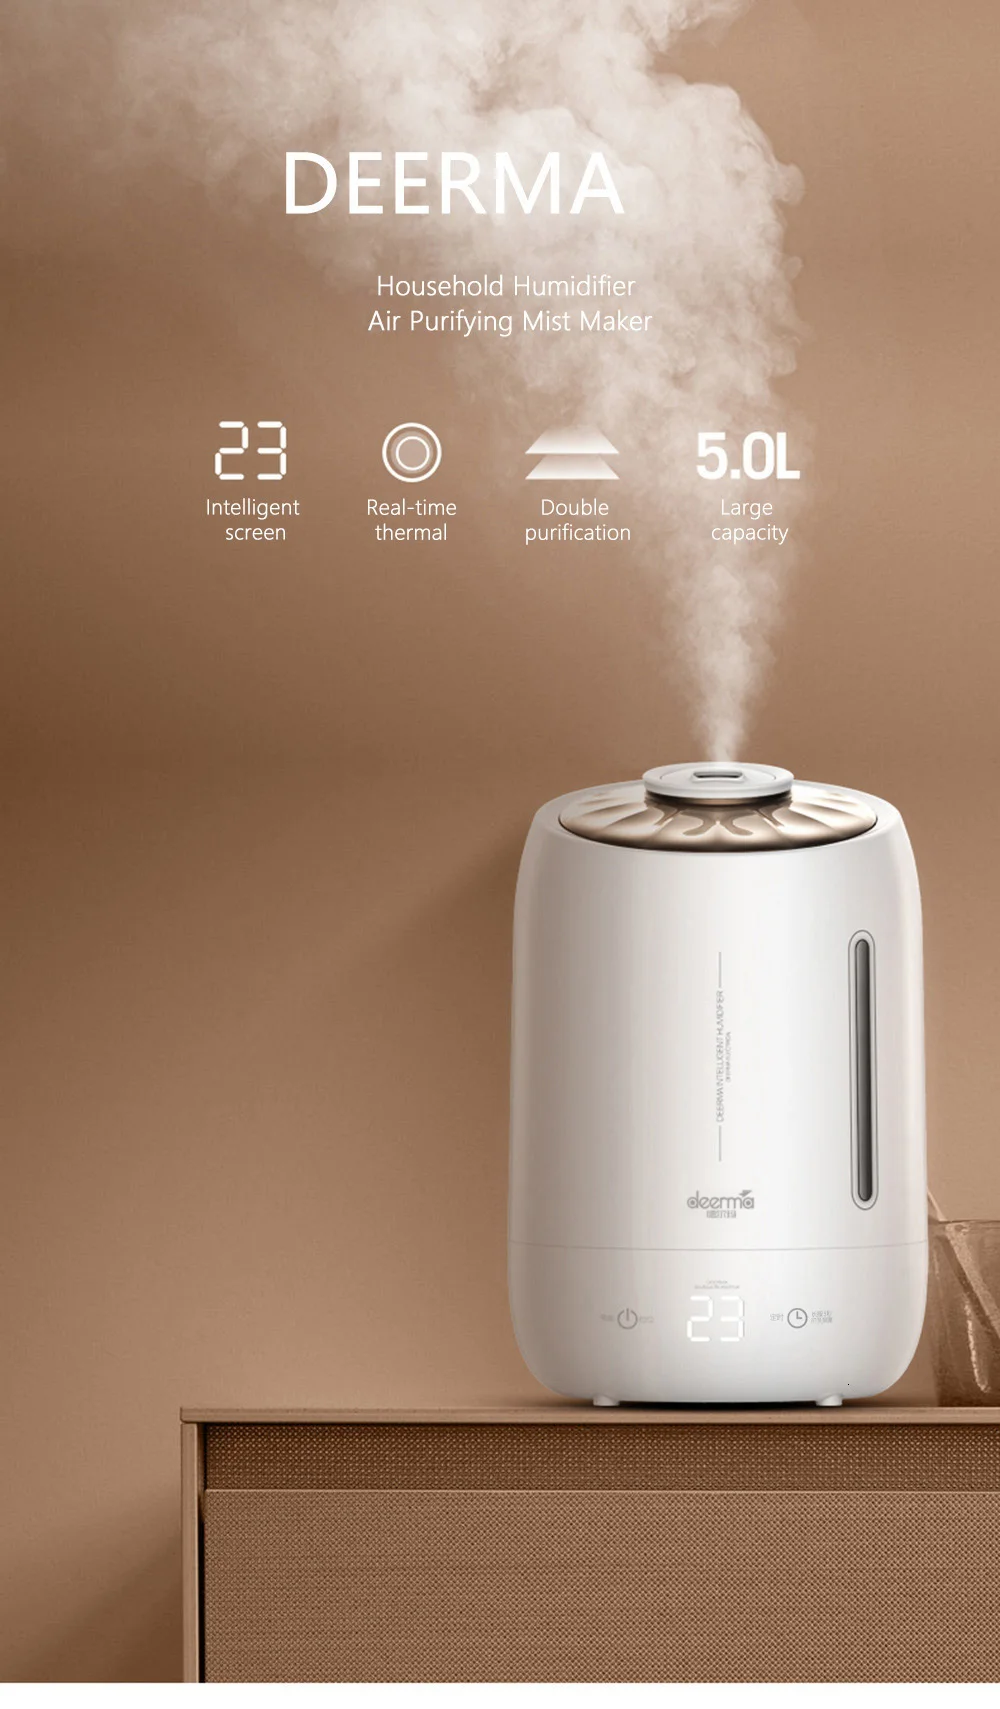 Xiaomi DEERMA Household Air Humidifier Air Purifying Mist Maker Timing With Intelligent Touch Screen Adjustable Fog Quantity 5L